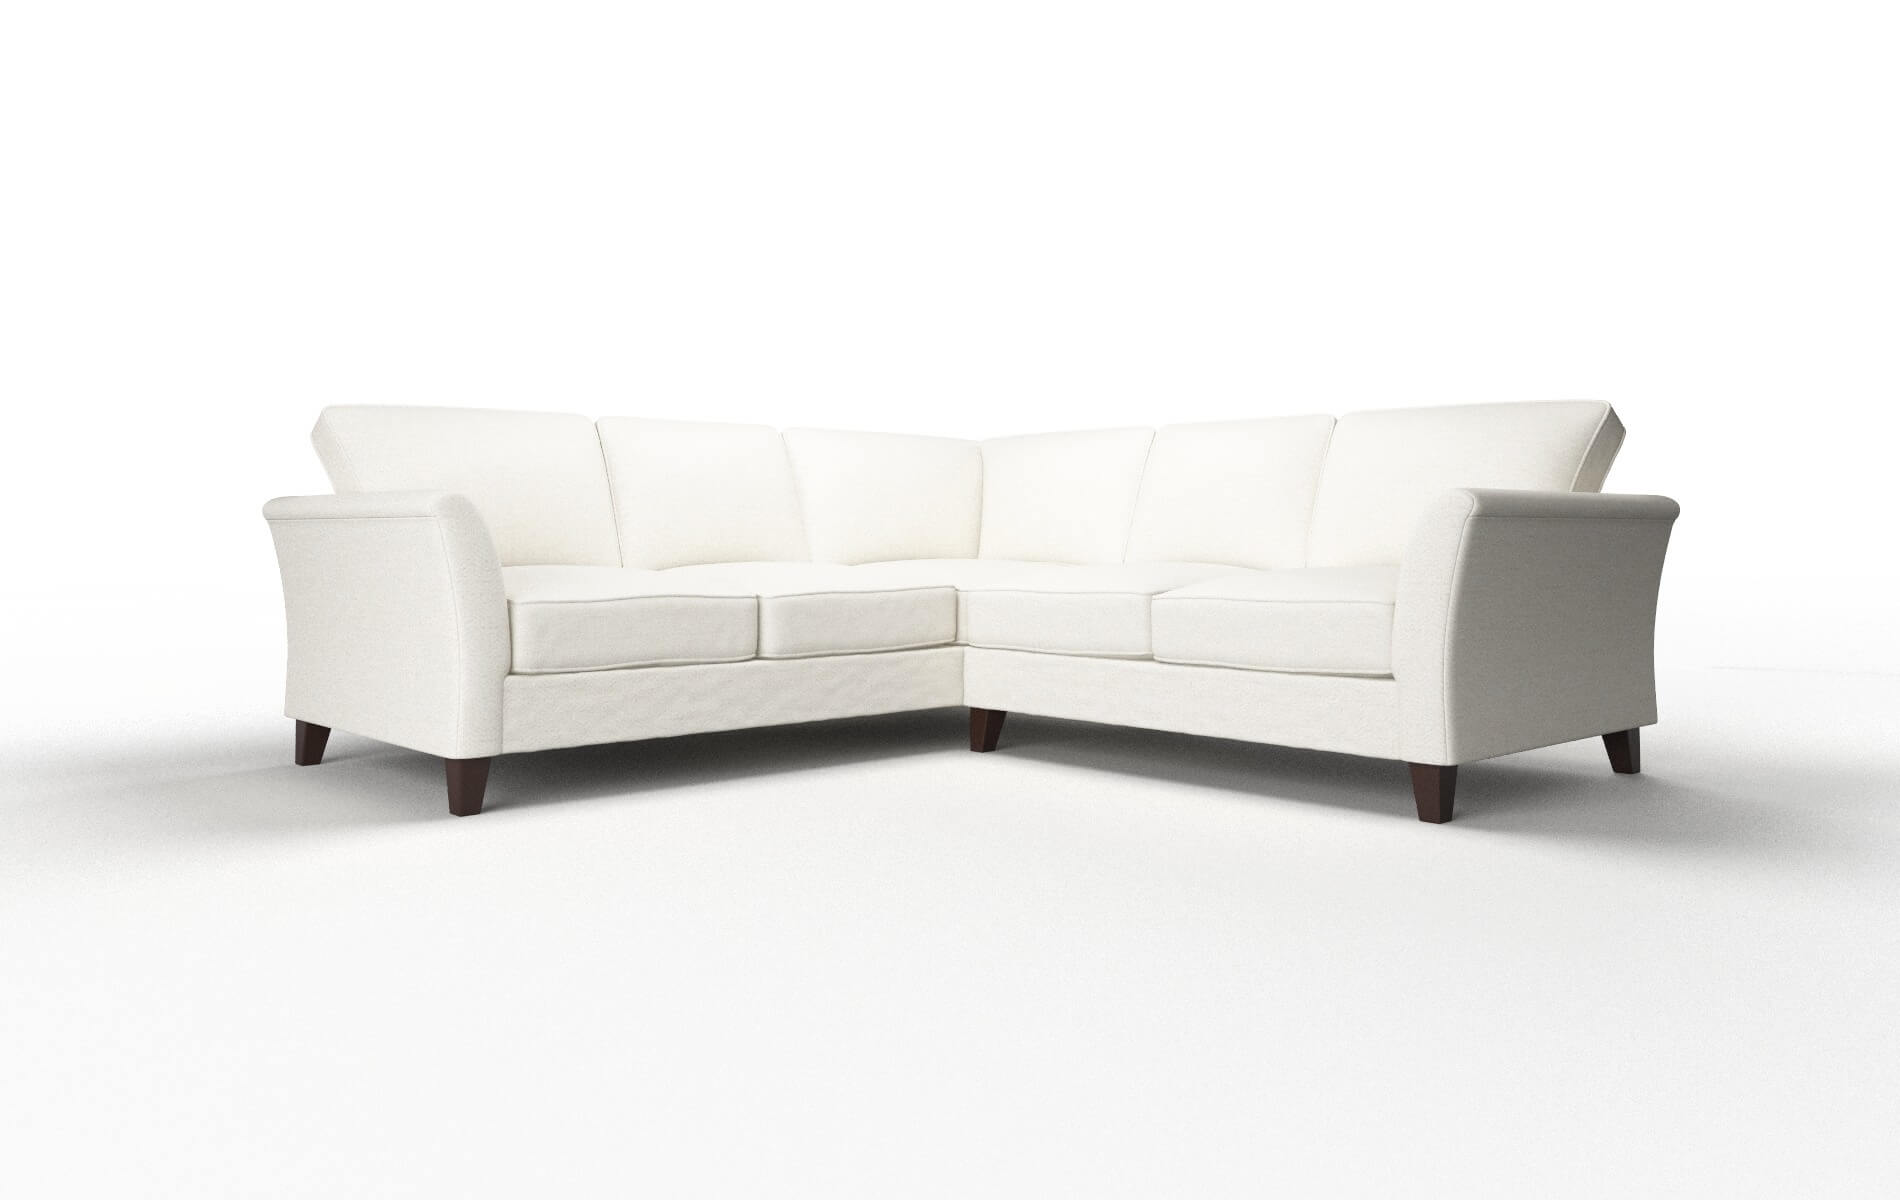 Cologne Catalina Ivory Sectional espresso legs